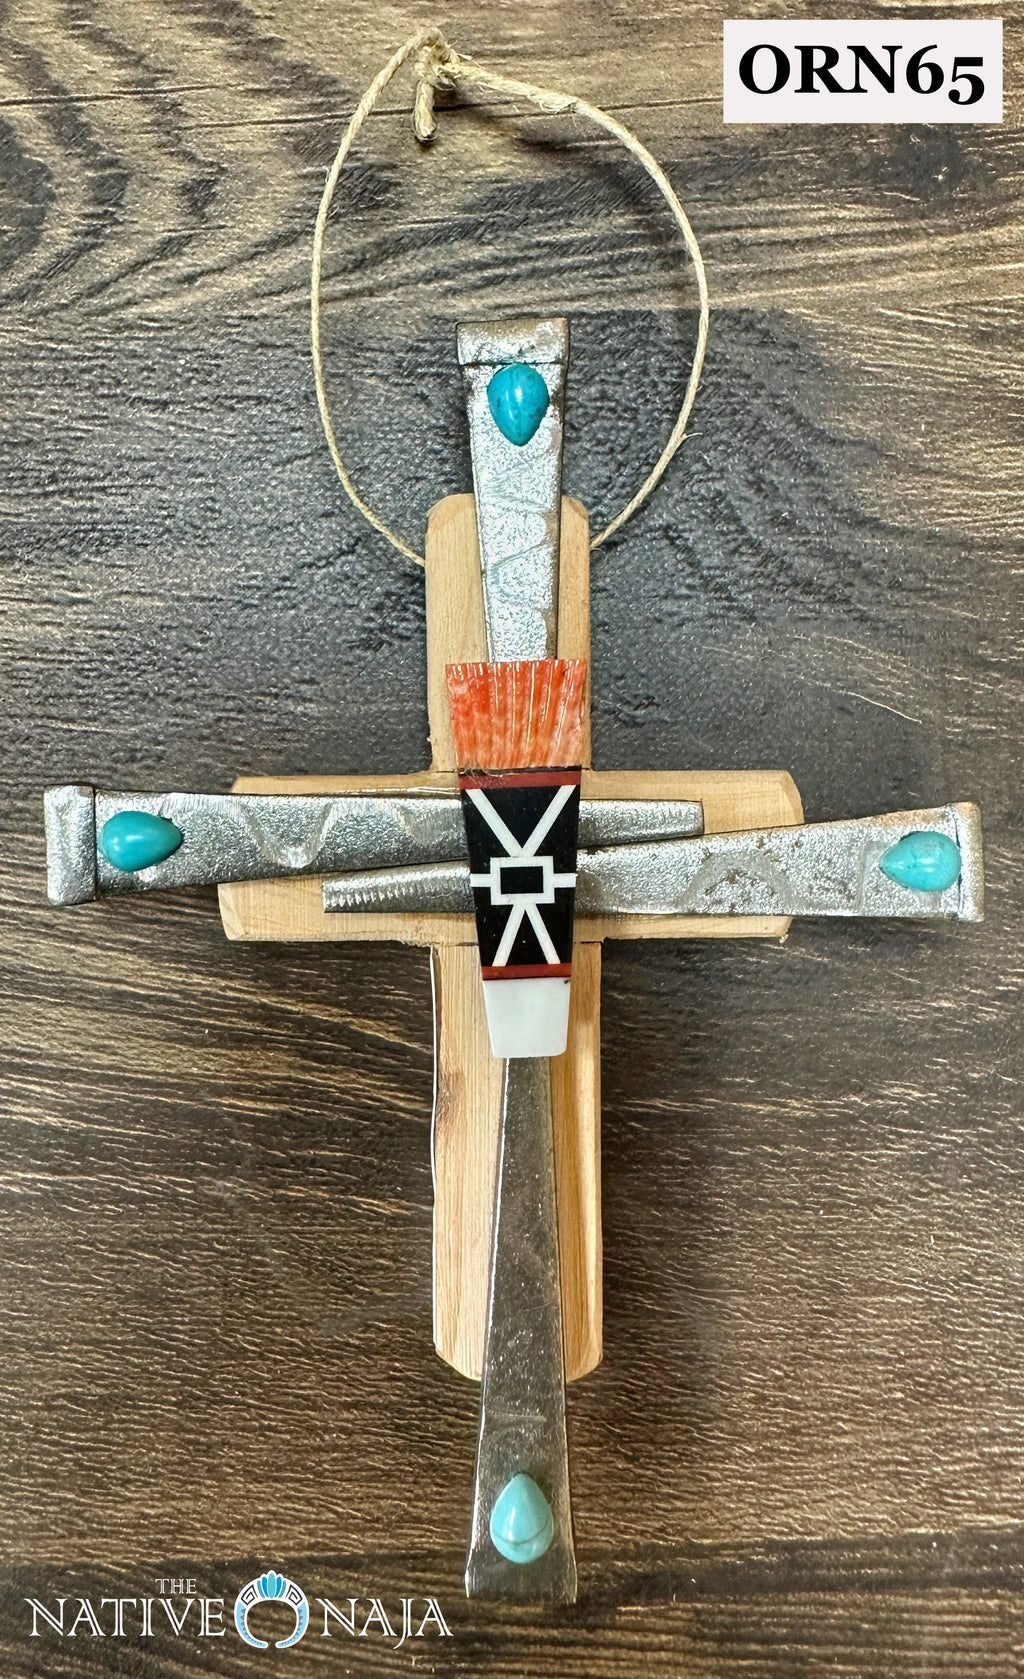 4"X5" Small Hanging Cross Ornament by NM Native American Artist Kenny Gallegos ORN65